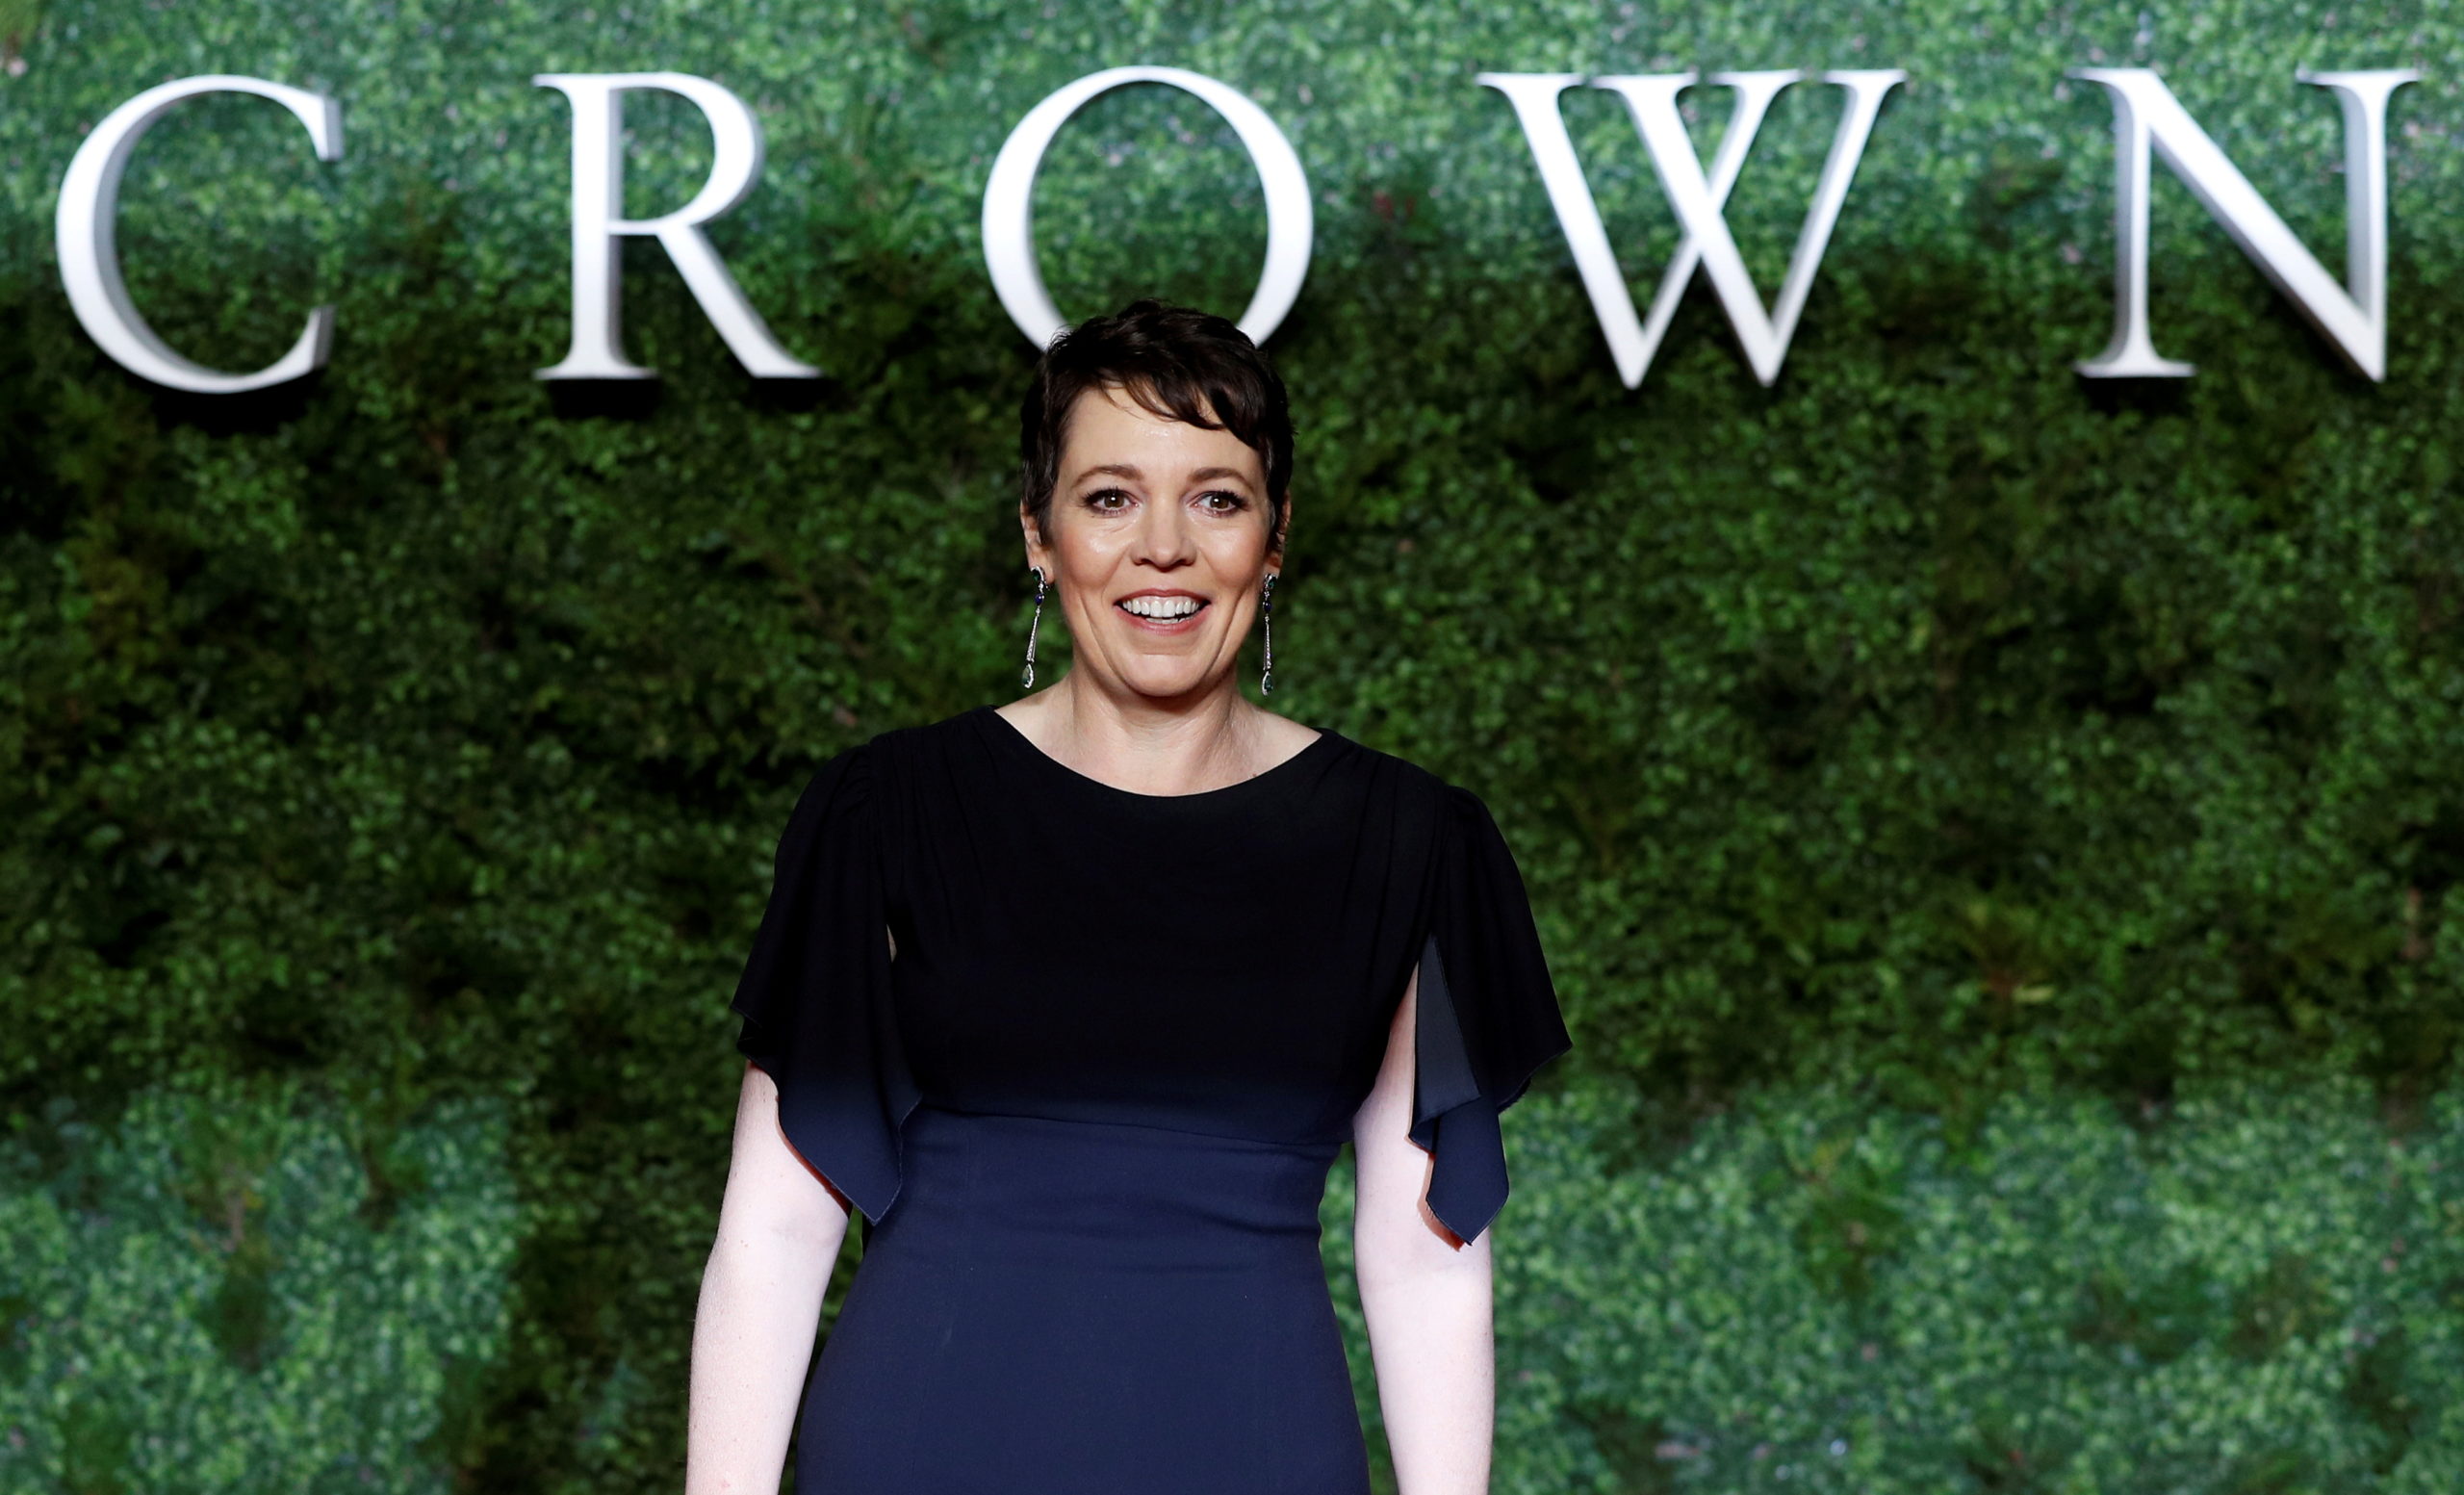 Actor Olivia Colman attends the world premiere of the third season of "The Crown" in London, Britain, November 13, 2019. REUTERS/Peter Nicholls/File Photo